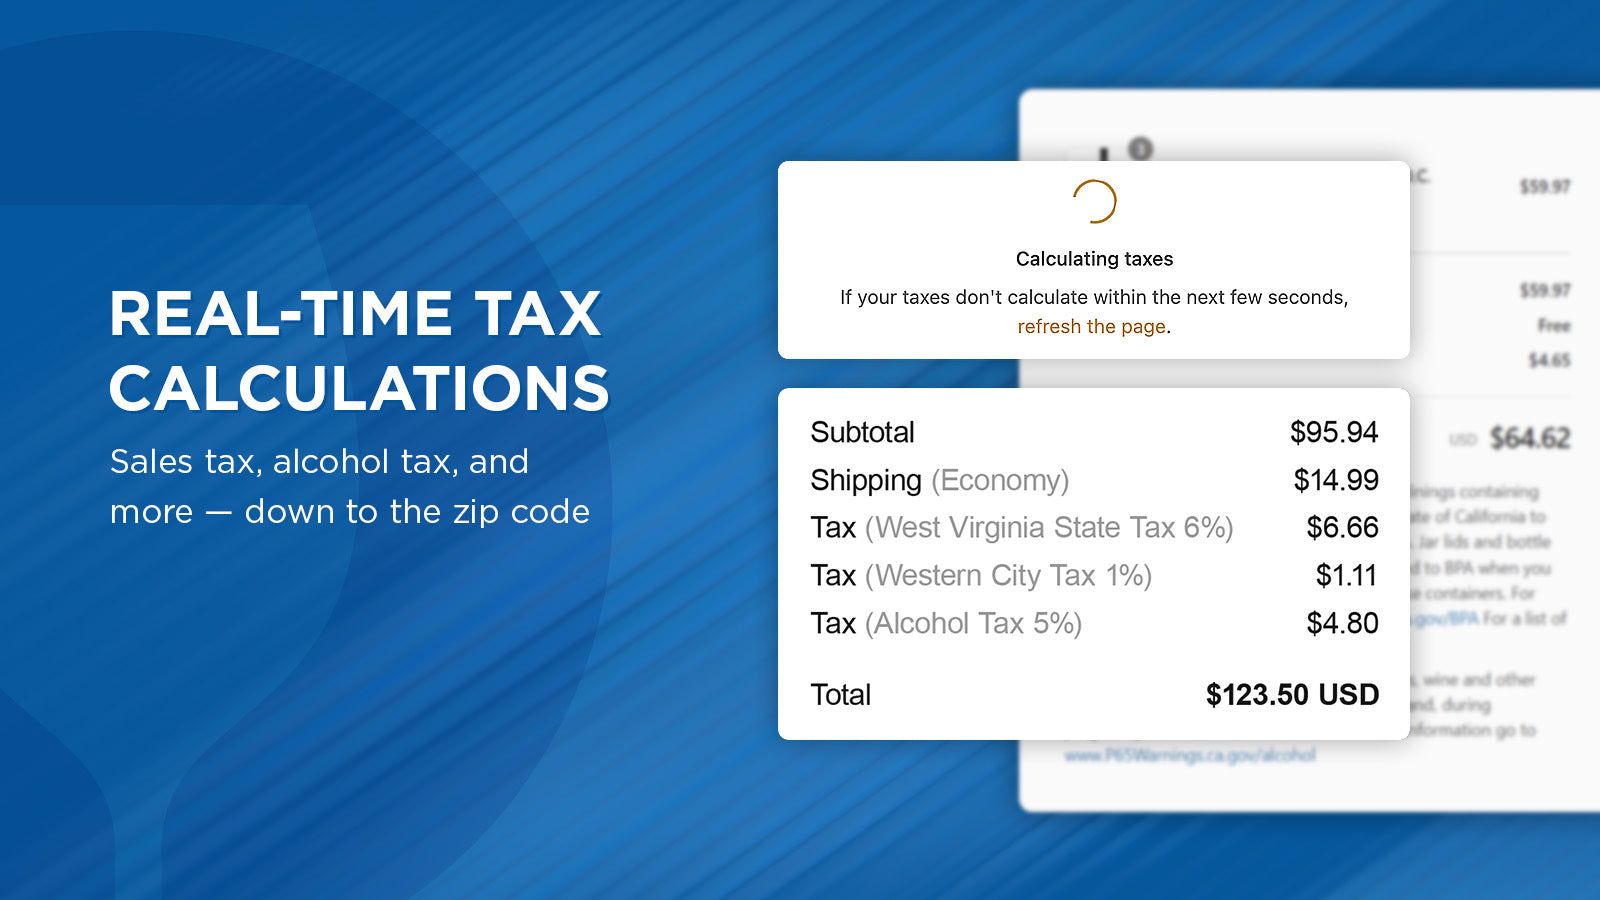 Real-Time Tax Calculations